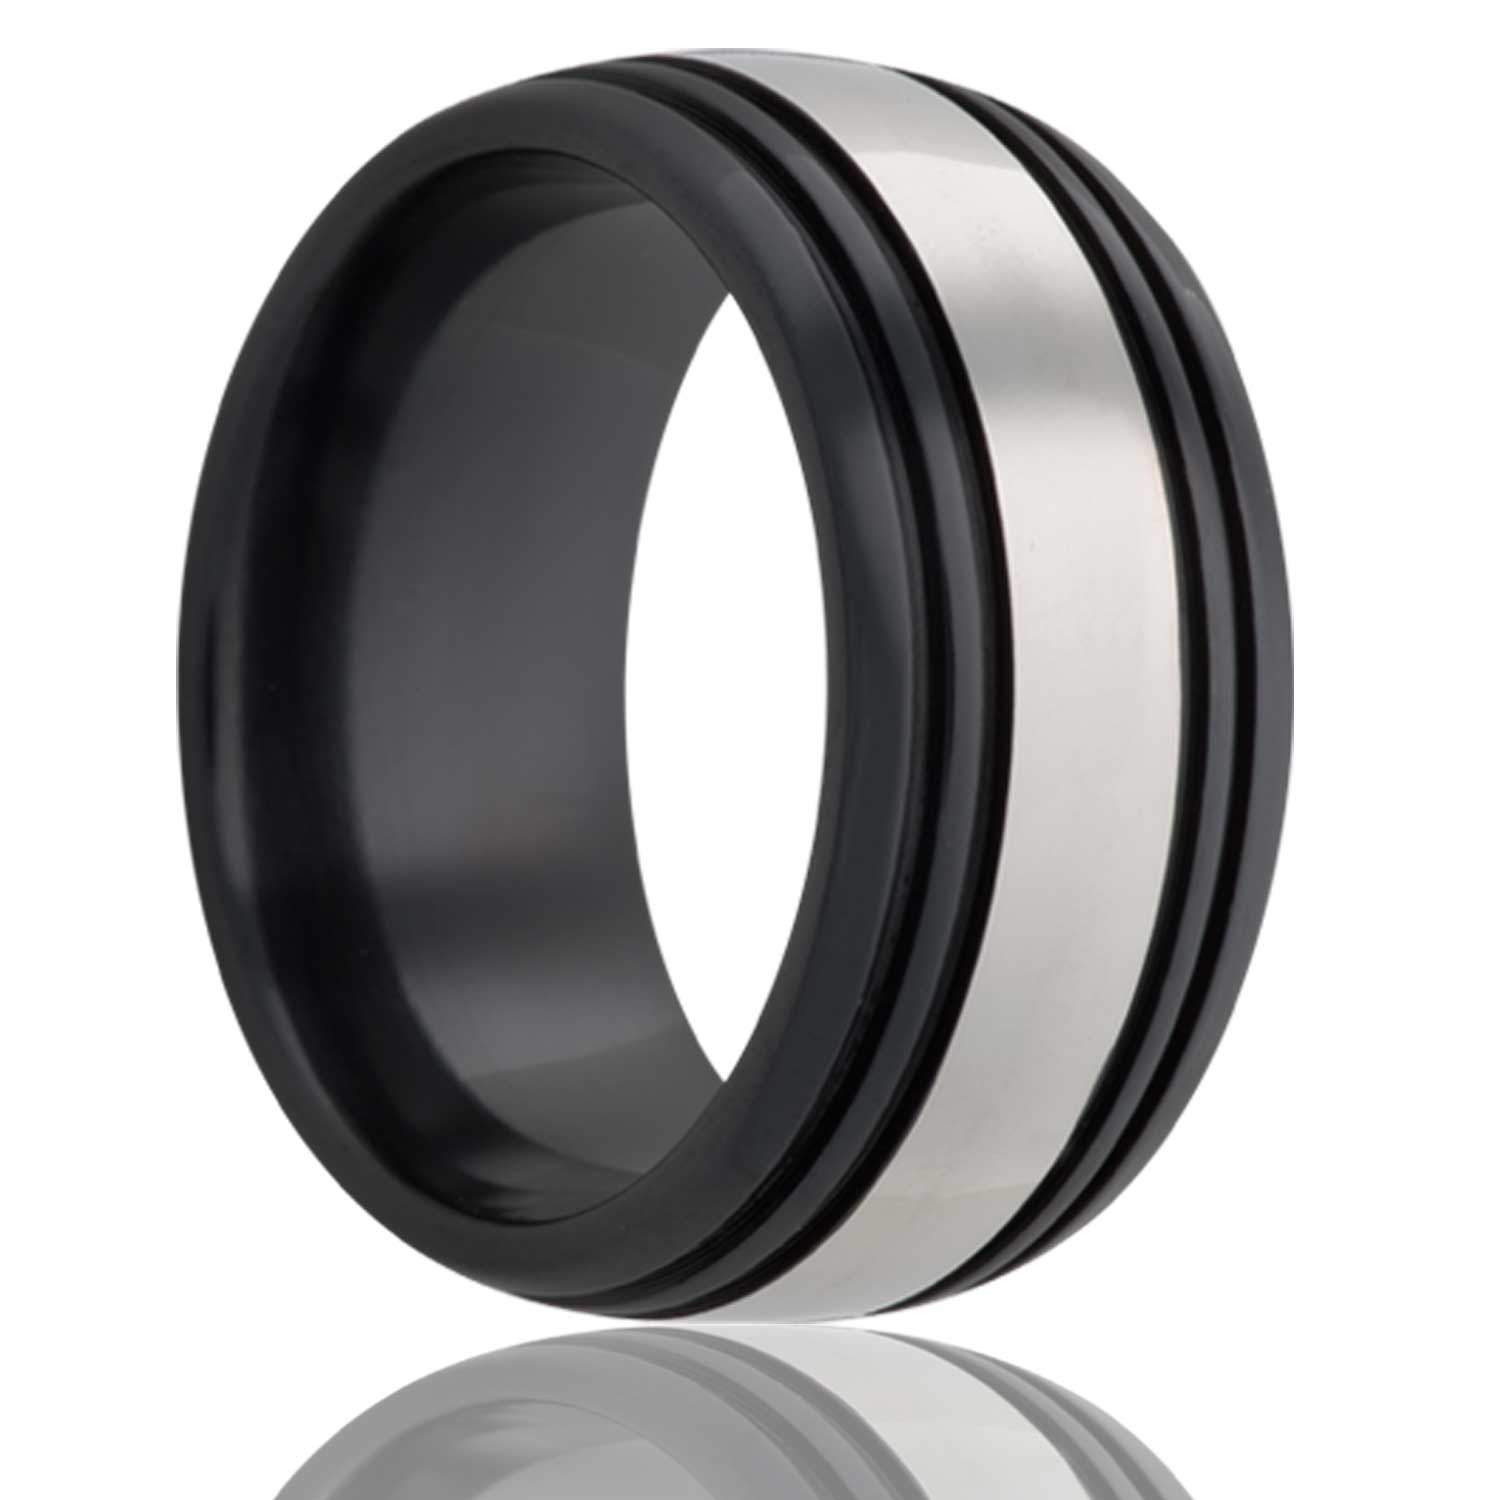 A domed zirconium wedding band with quadruple grooves & polished center stripe displayed on a neutral white background.